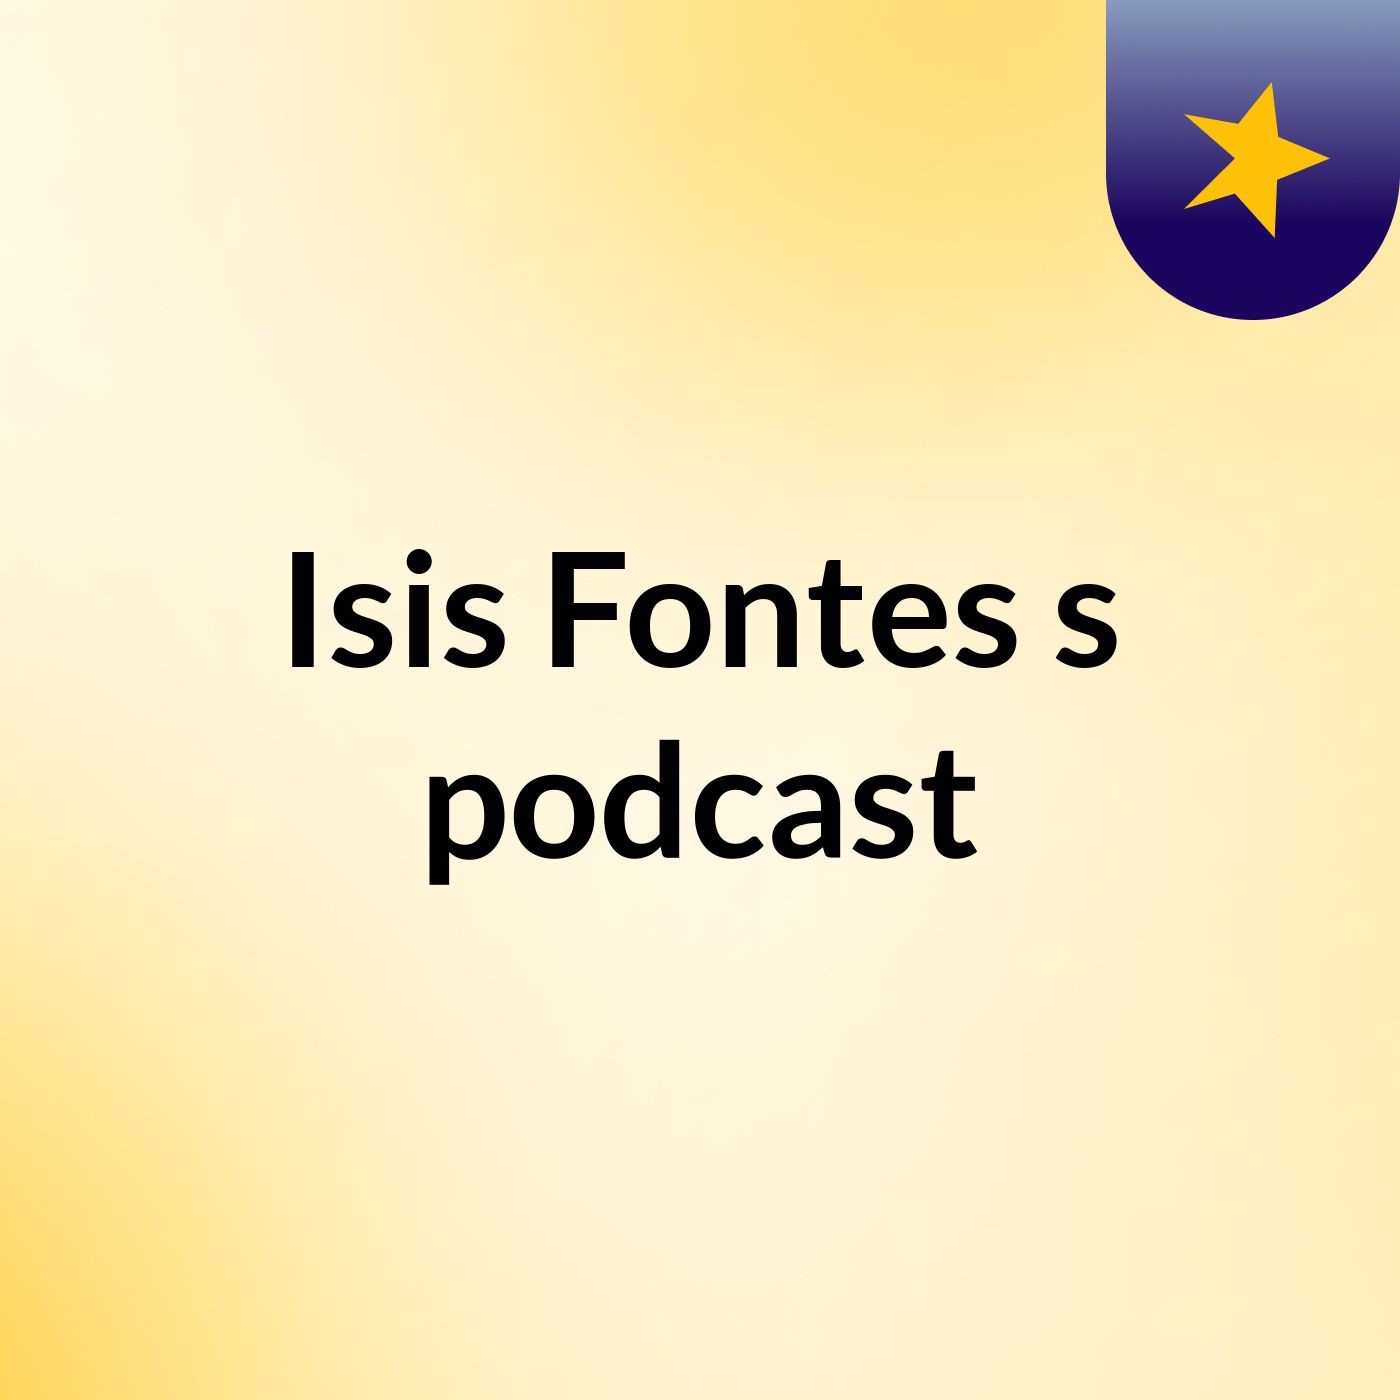 Isis Fontes's podcast